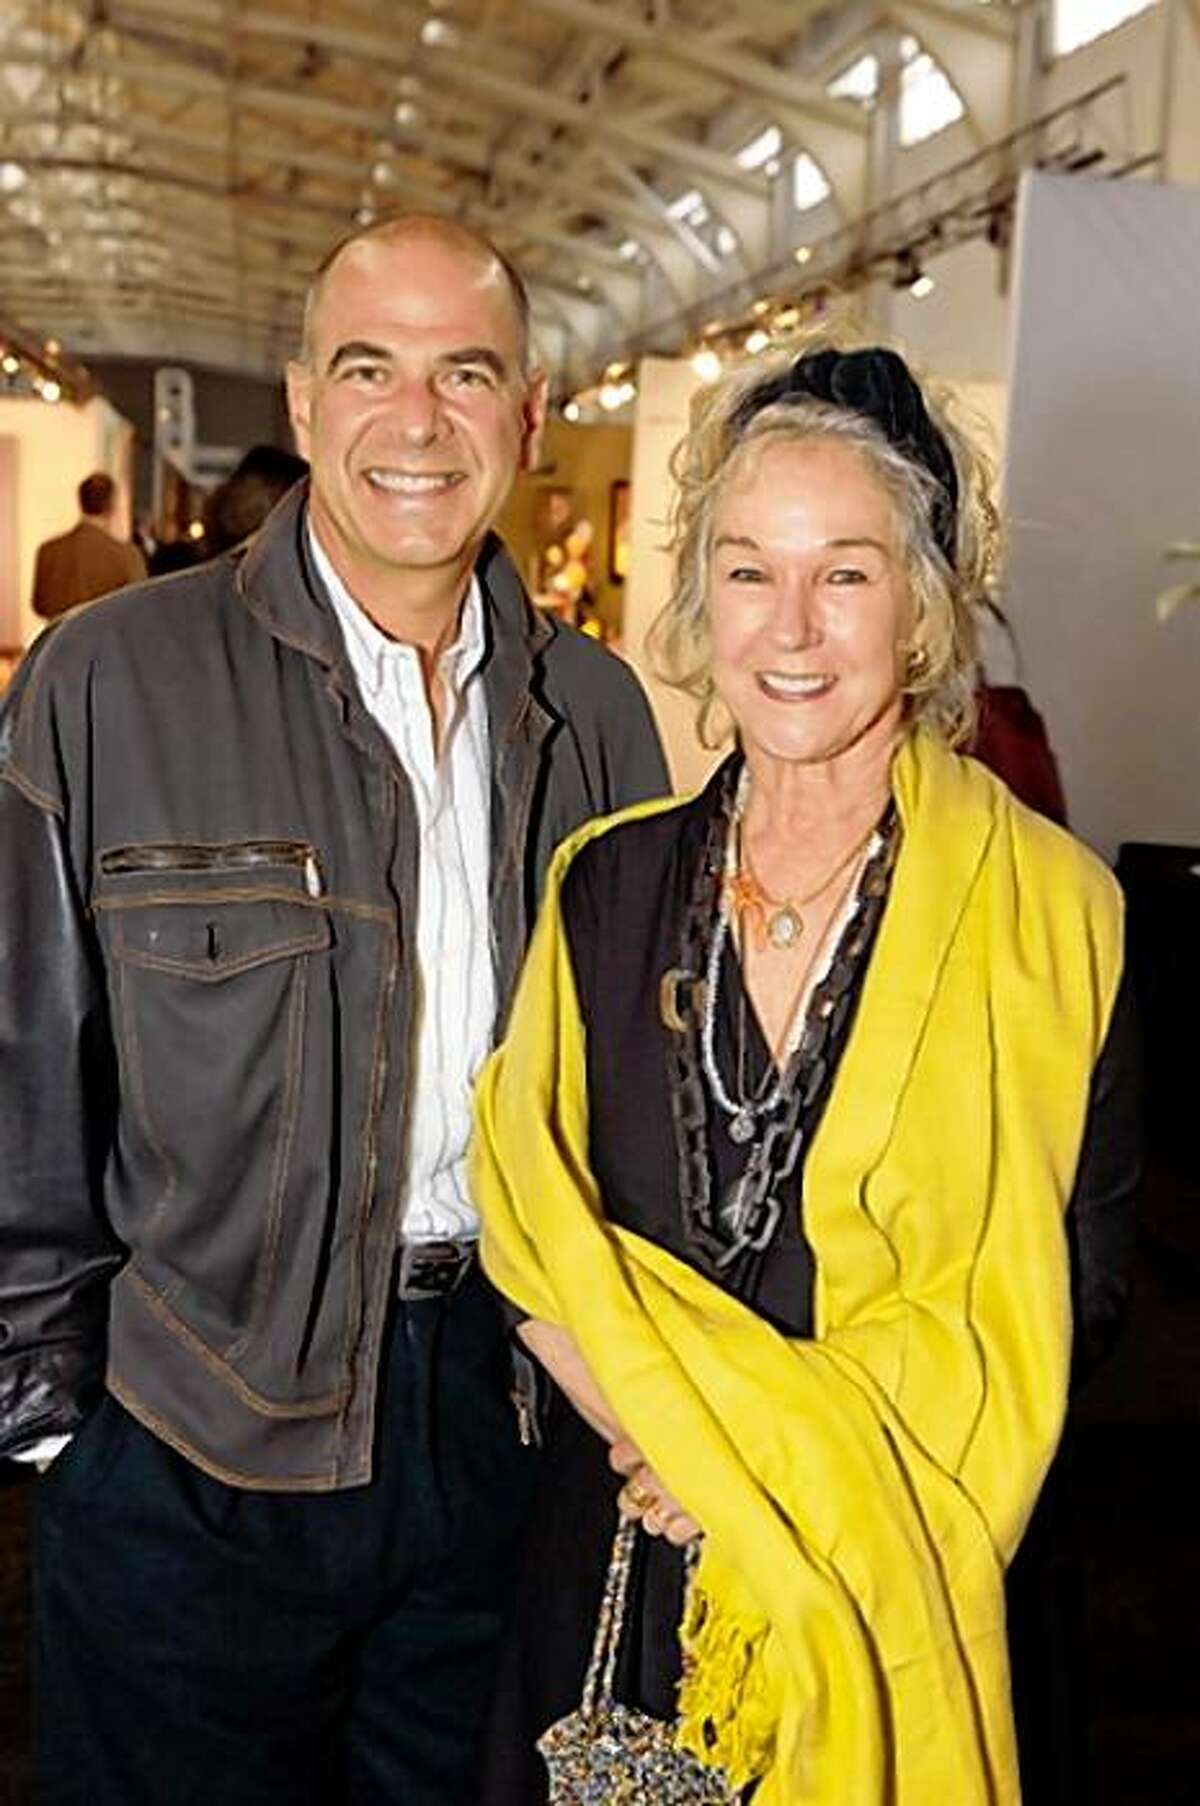 The second annual SF20, a mid-century modern furniture, art and textiles show at Fort Mason, drew hundreds of guests on gala night Sept. 24, 2009. The show benefitted SFMOMA. From left to right: Tod Donobedian, Susie Tompkins Buell